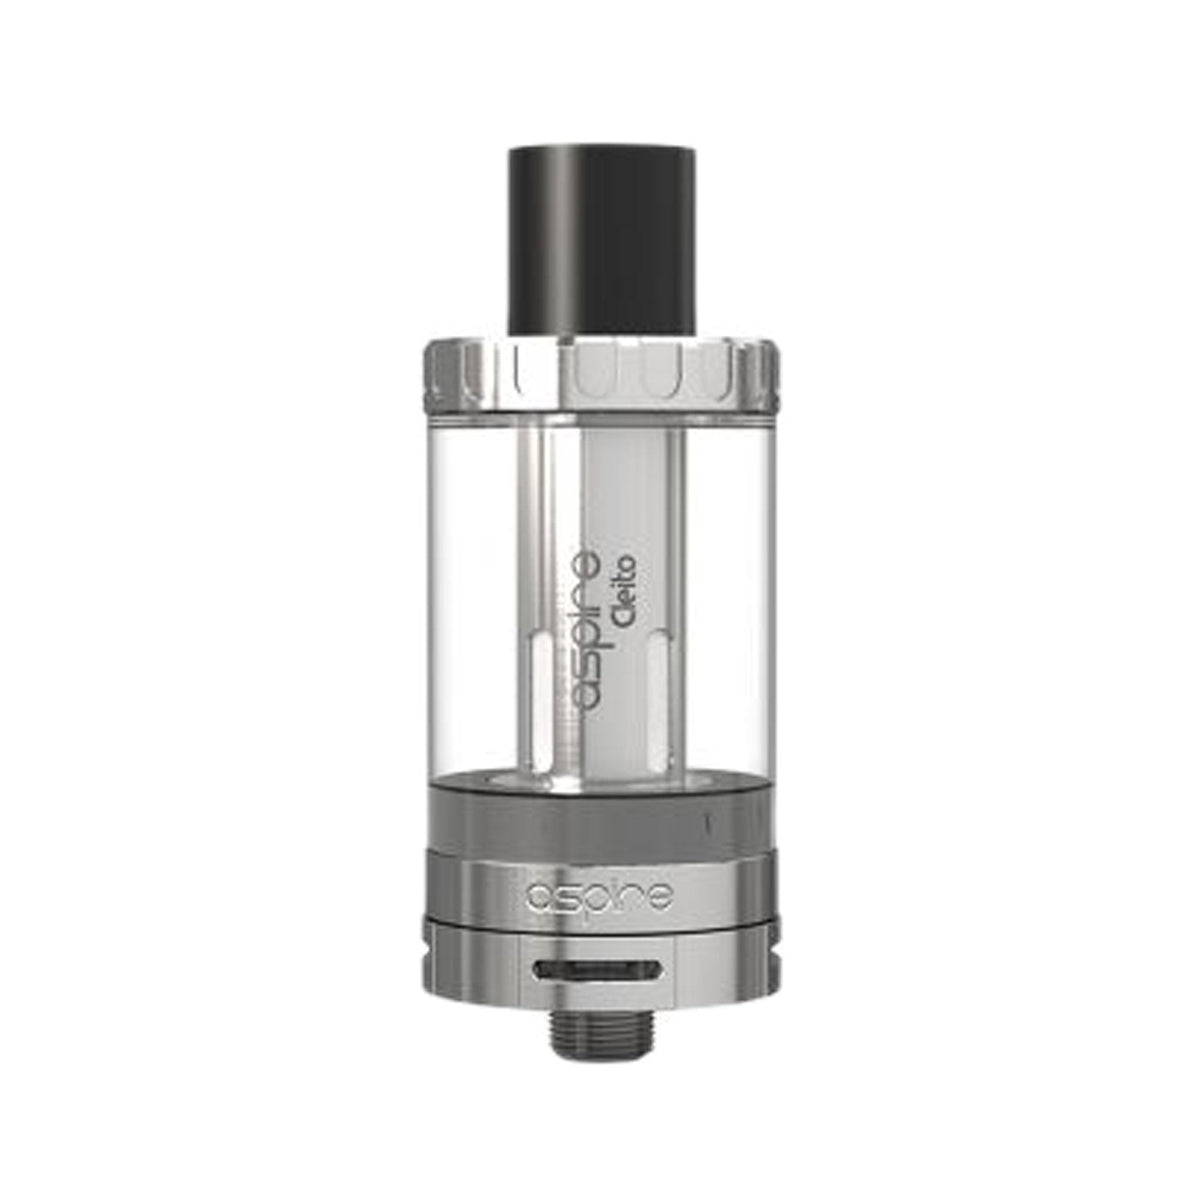 Aspire Cleito Tank Stainless Steel